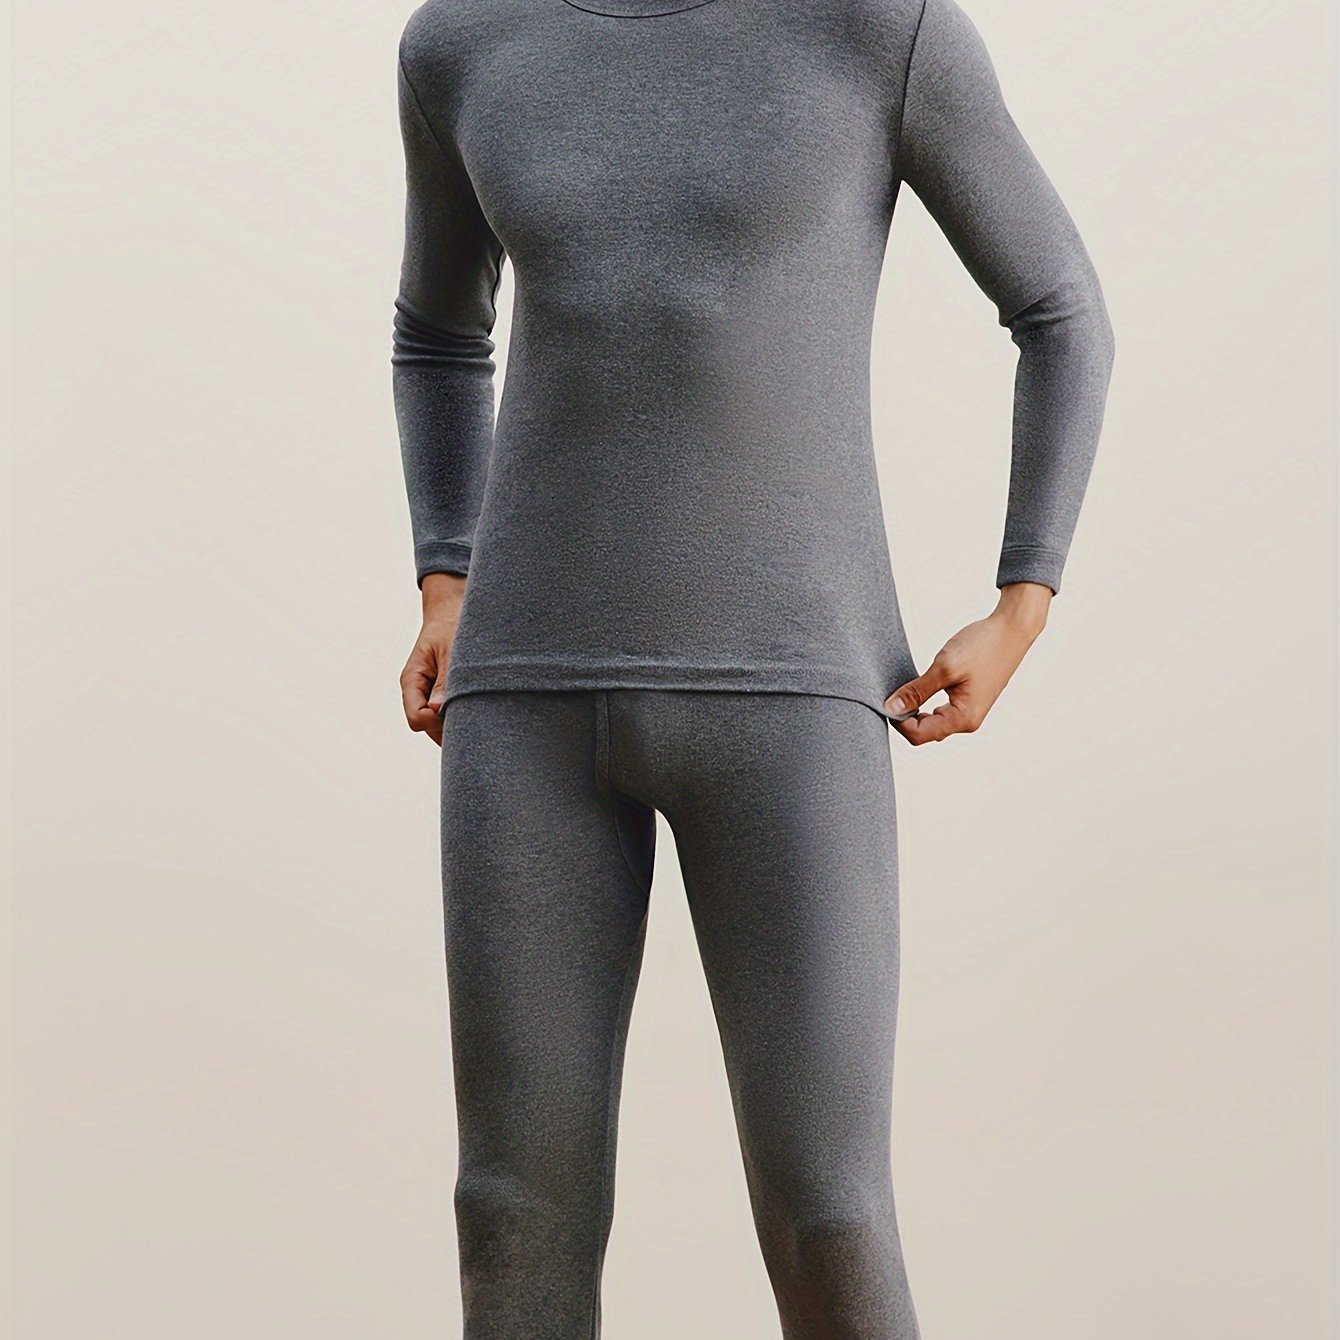 Shoppers Love This 'Super Soft and Stretchy' Thermal Underwear Set